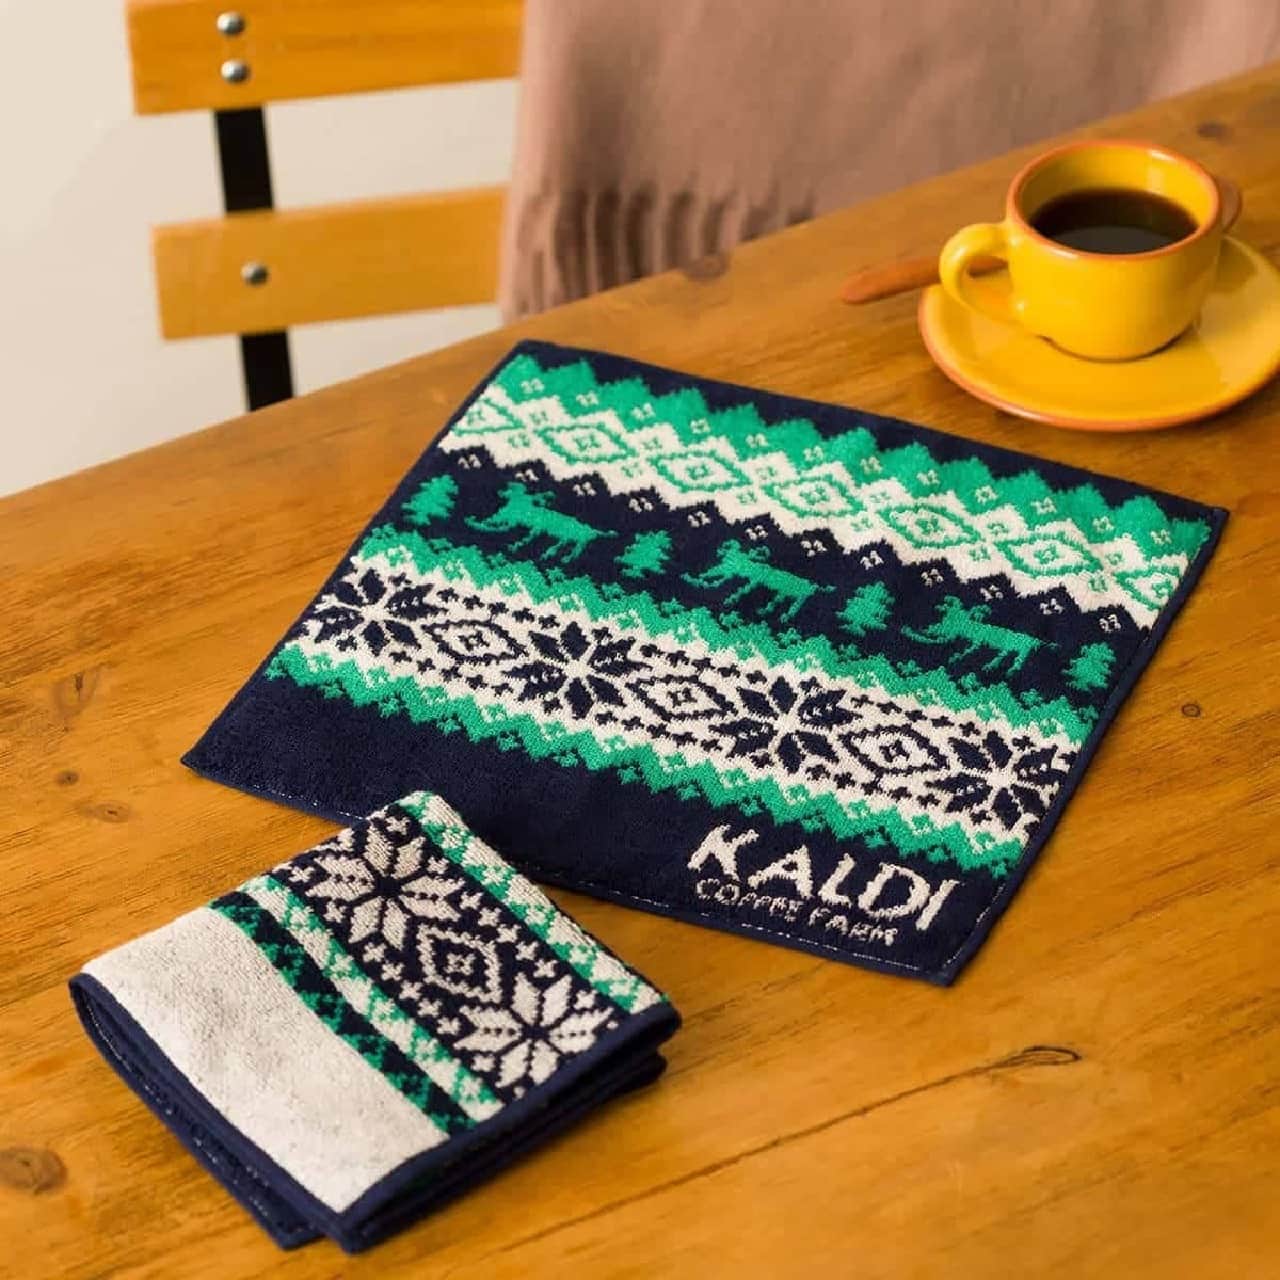 You can get "Imabari Towel Handkerchief" by purchasing KALDI coffee beans